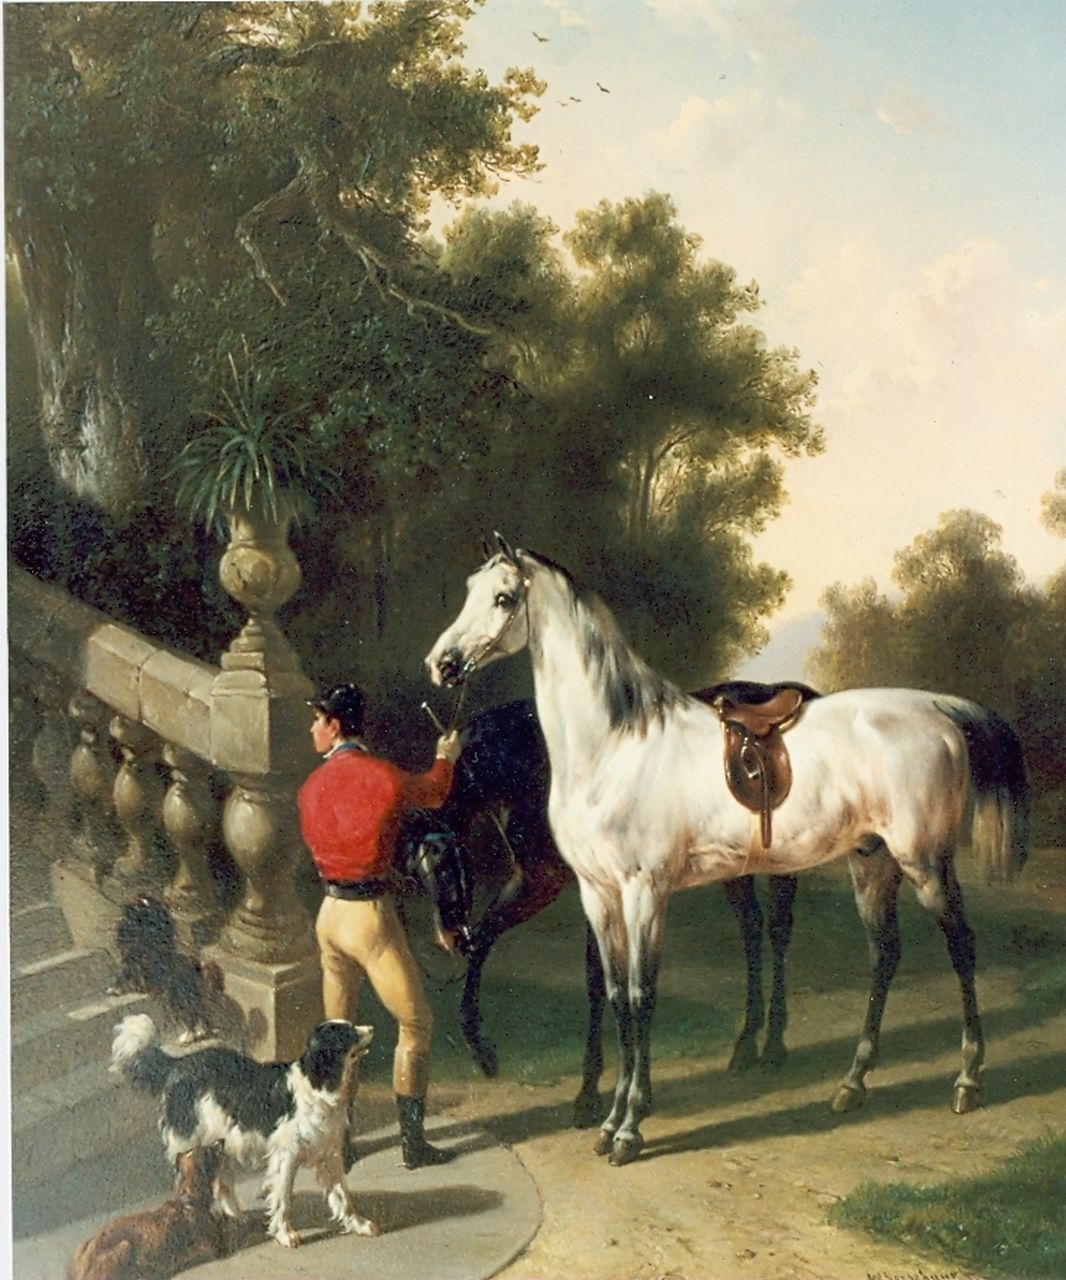 Verschuur W.  | Wouterus Verschuur, Horsemen and horses, oil on panel 34.0 x 29.5 cm, signed l.r. and dated 1887